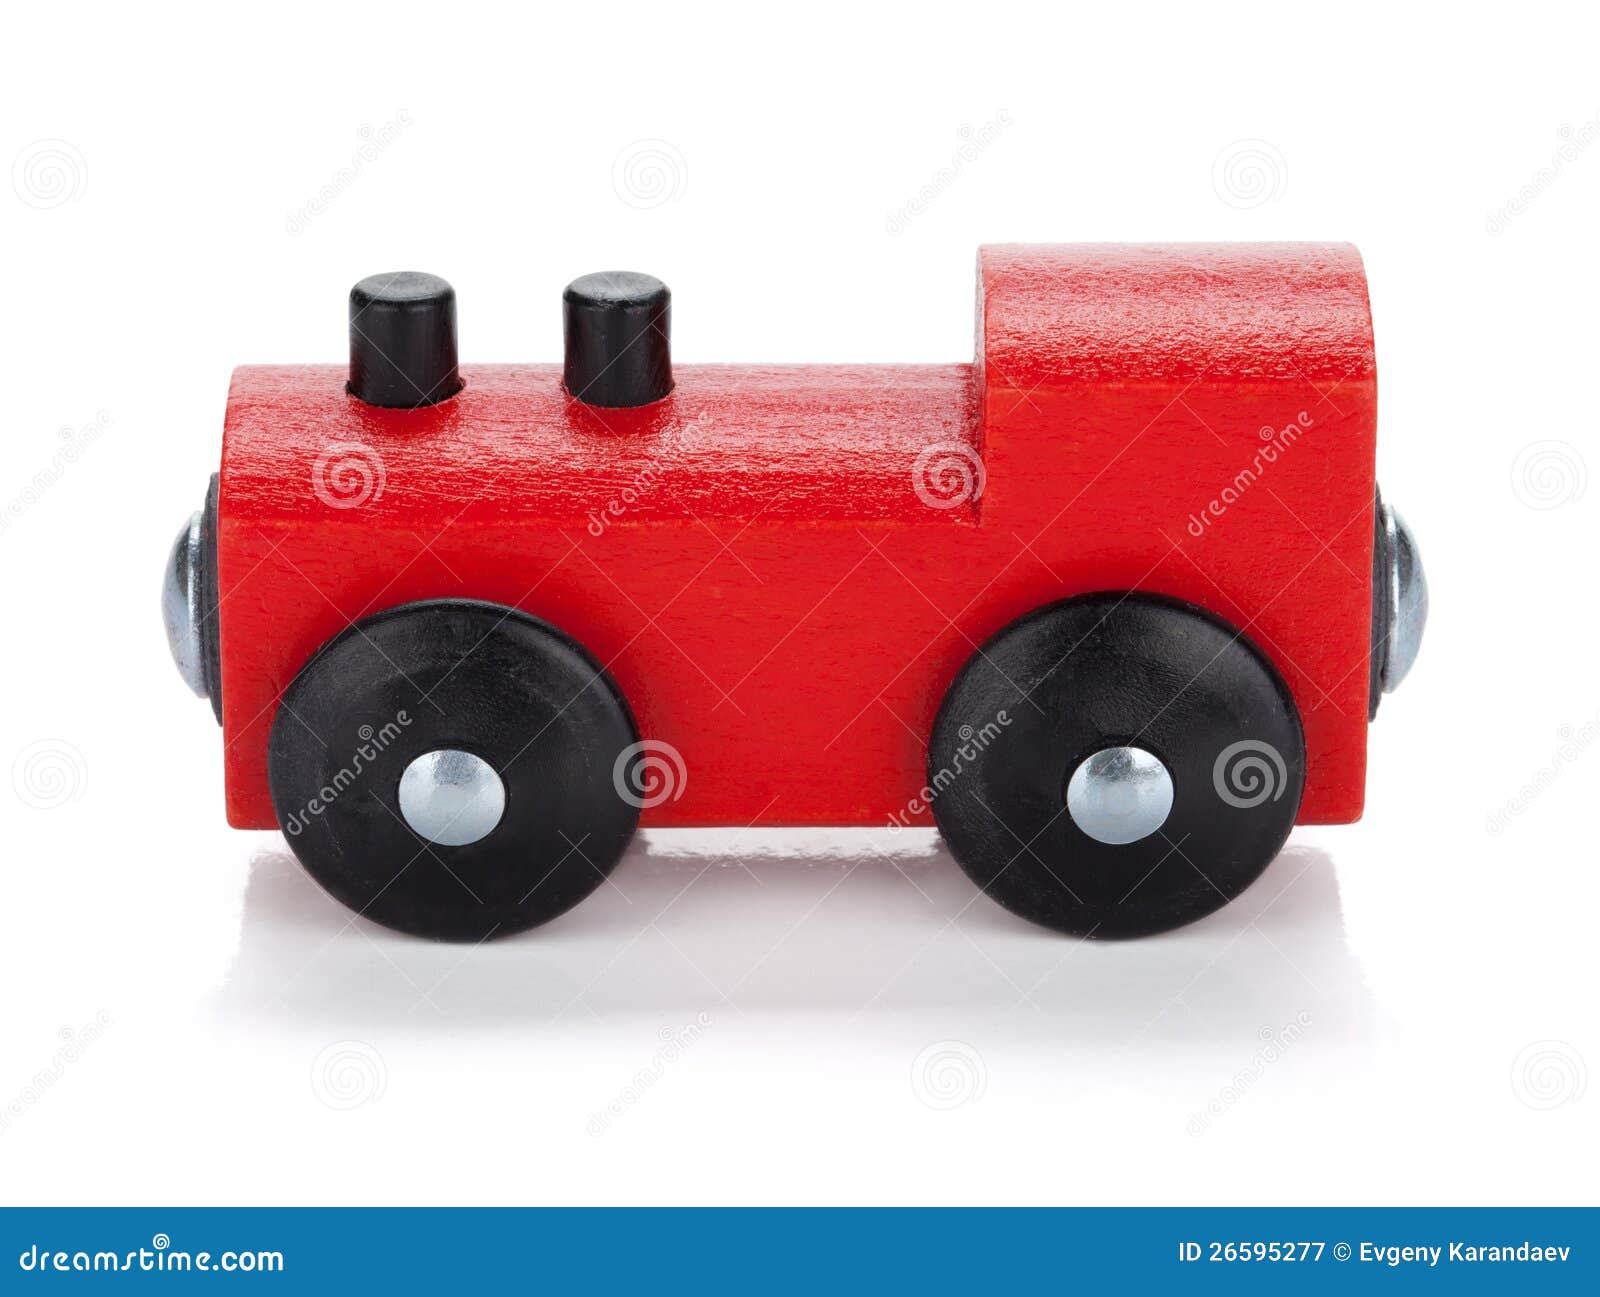 Plans For Wooden Toy Trains  www.woodworking.bofusfocus.com